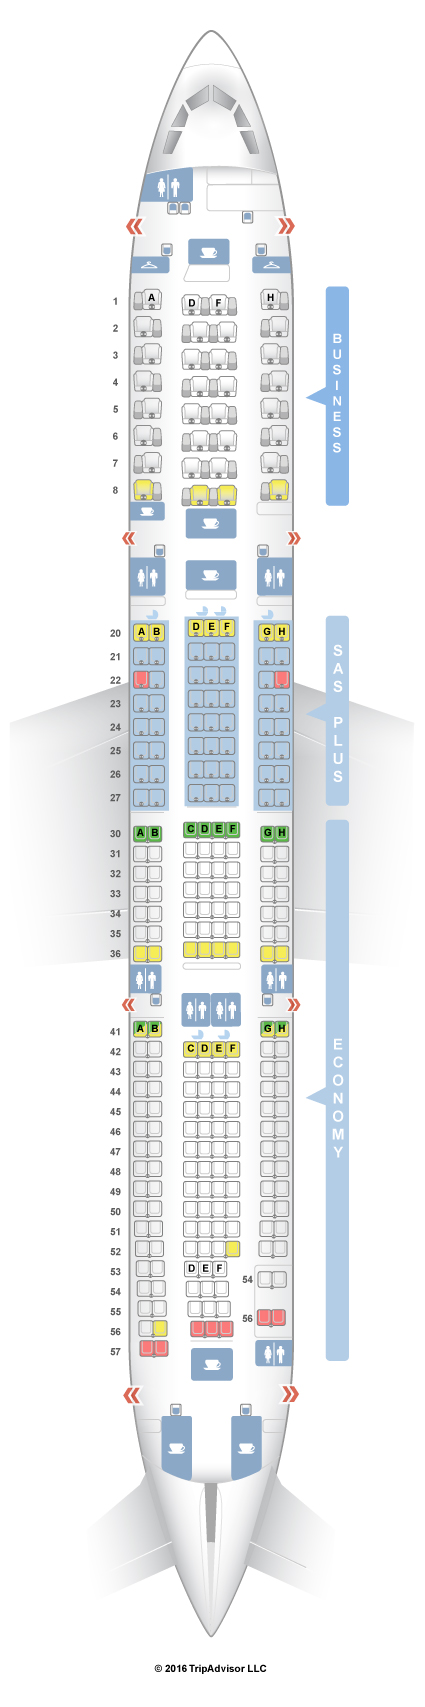 Airbus A330-300 Seat Map